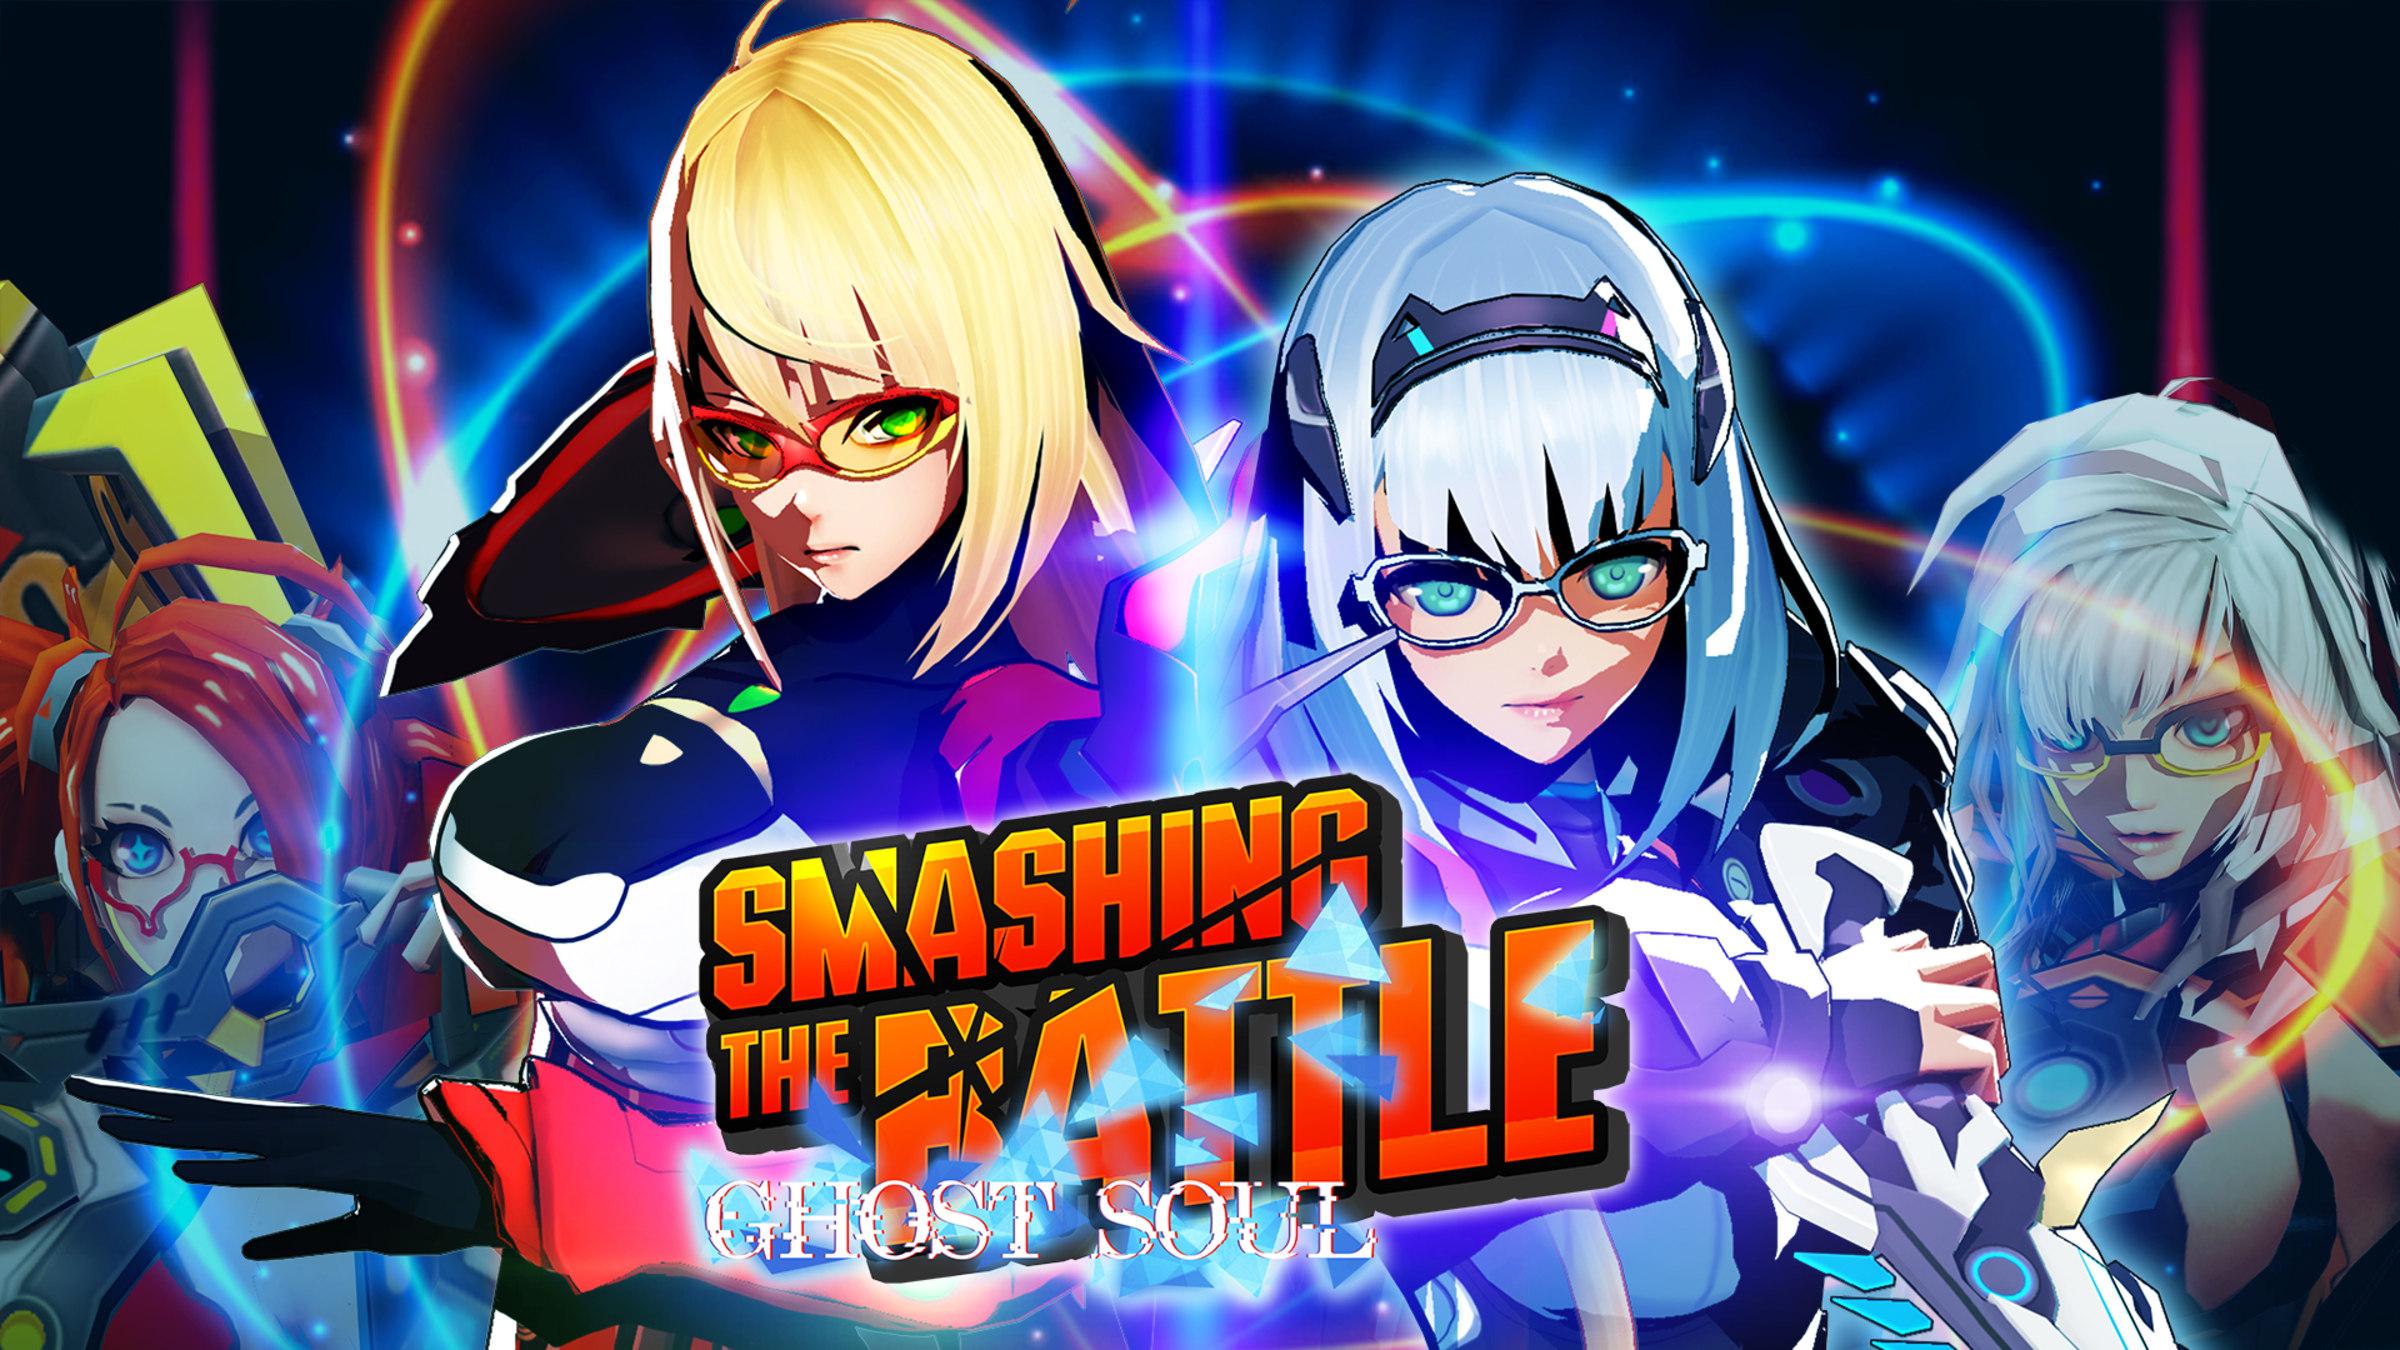 SMASHING THE BATTLE GHOST SOUL for Nintendo Switch - Nintendo Official Site